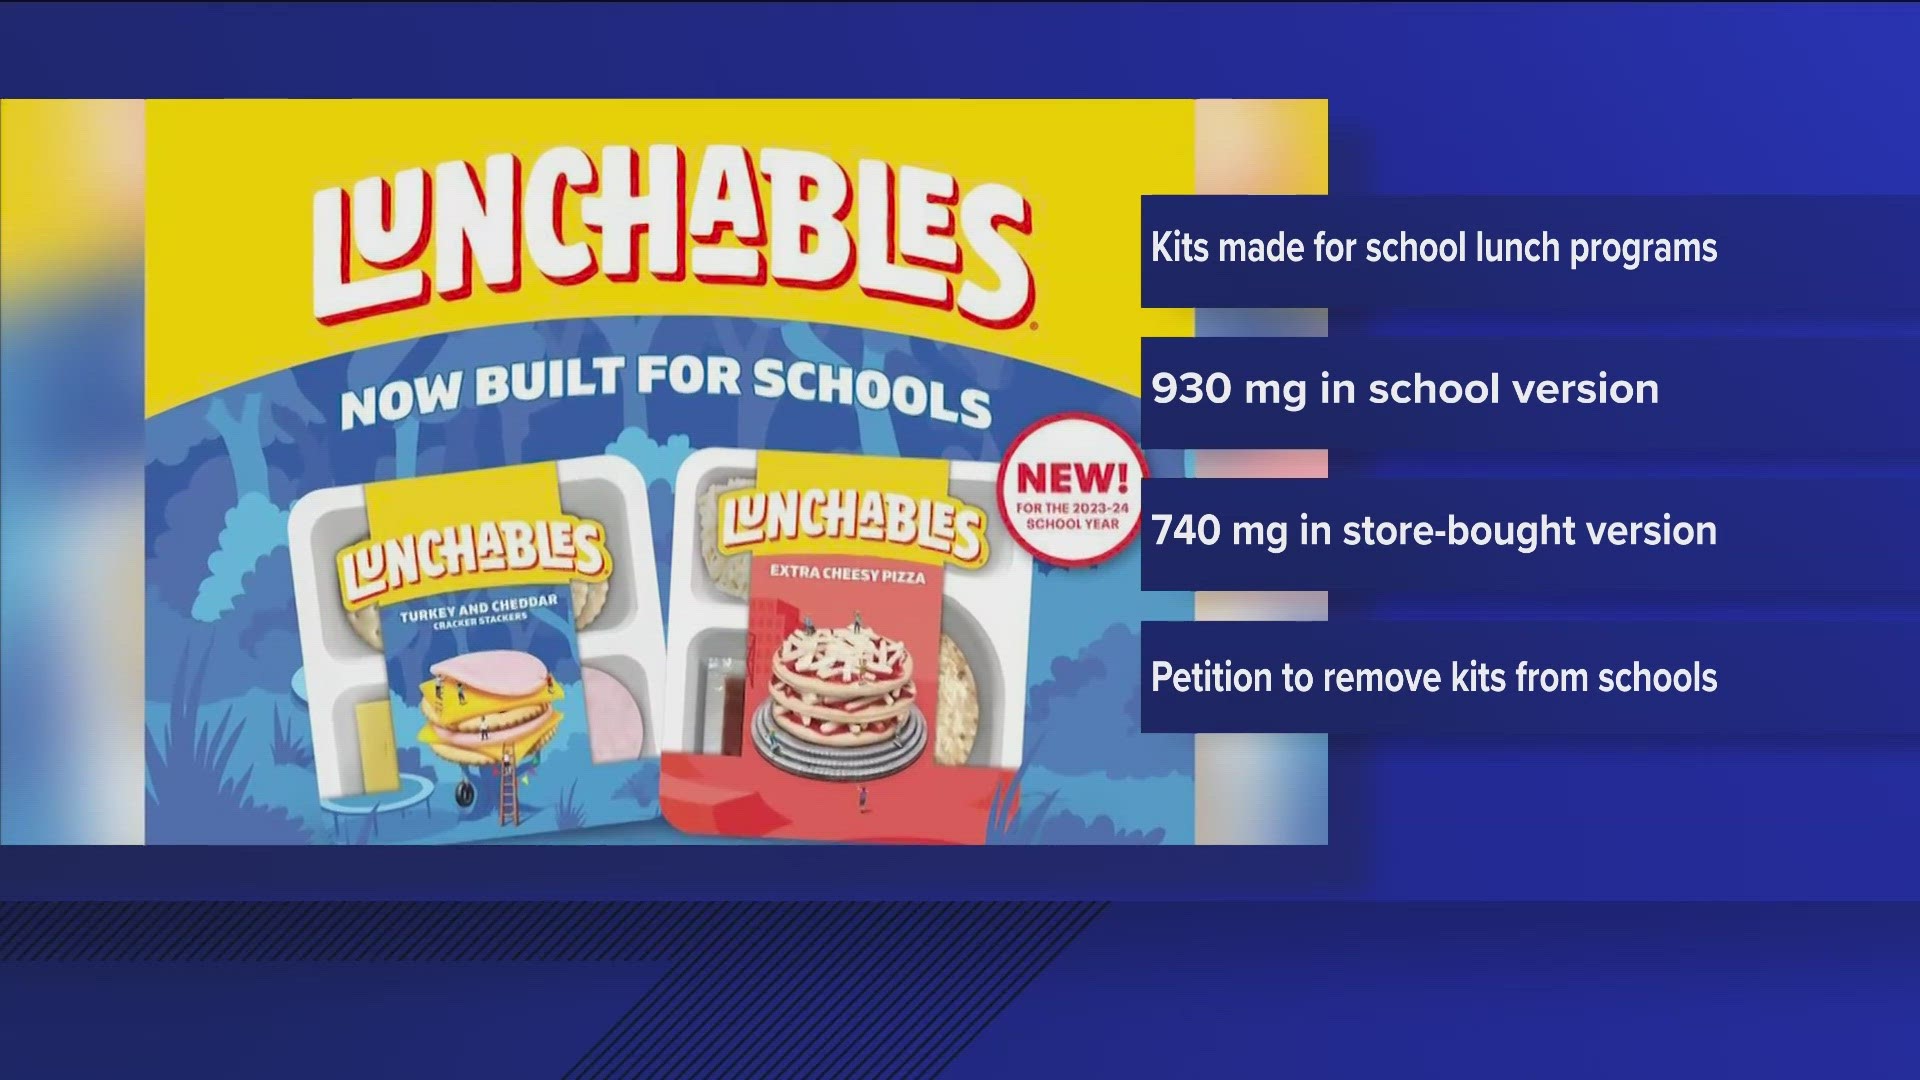 The watchdog group, Consumer Reports, is warning about two versions of the kits that were made specifically to be part of school lunch programs.